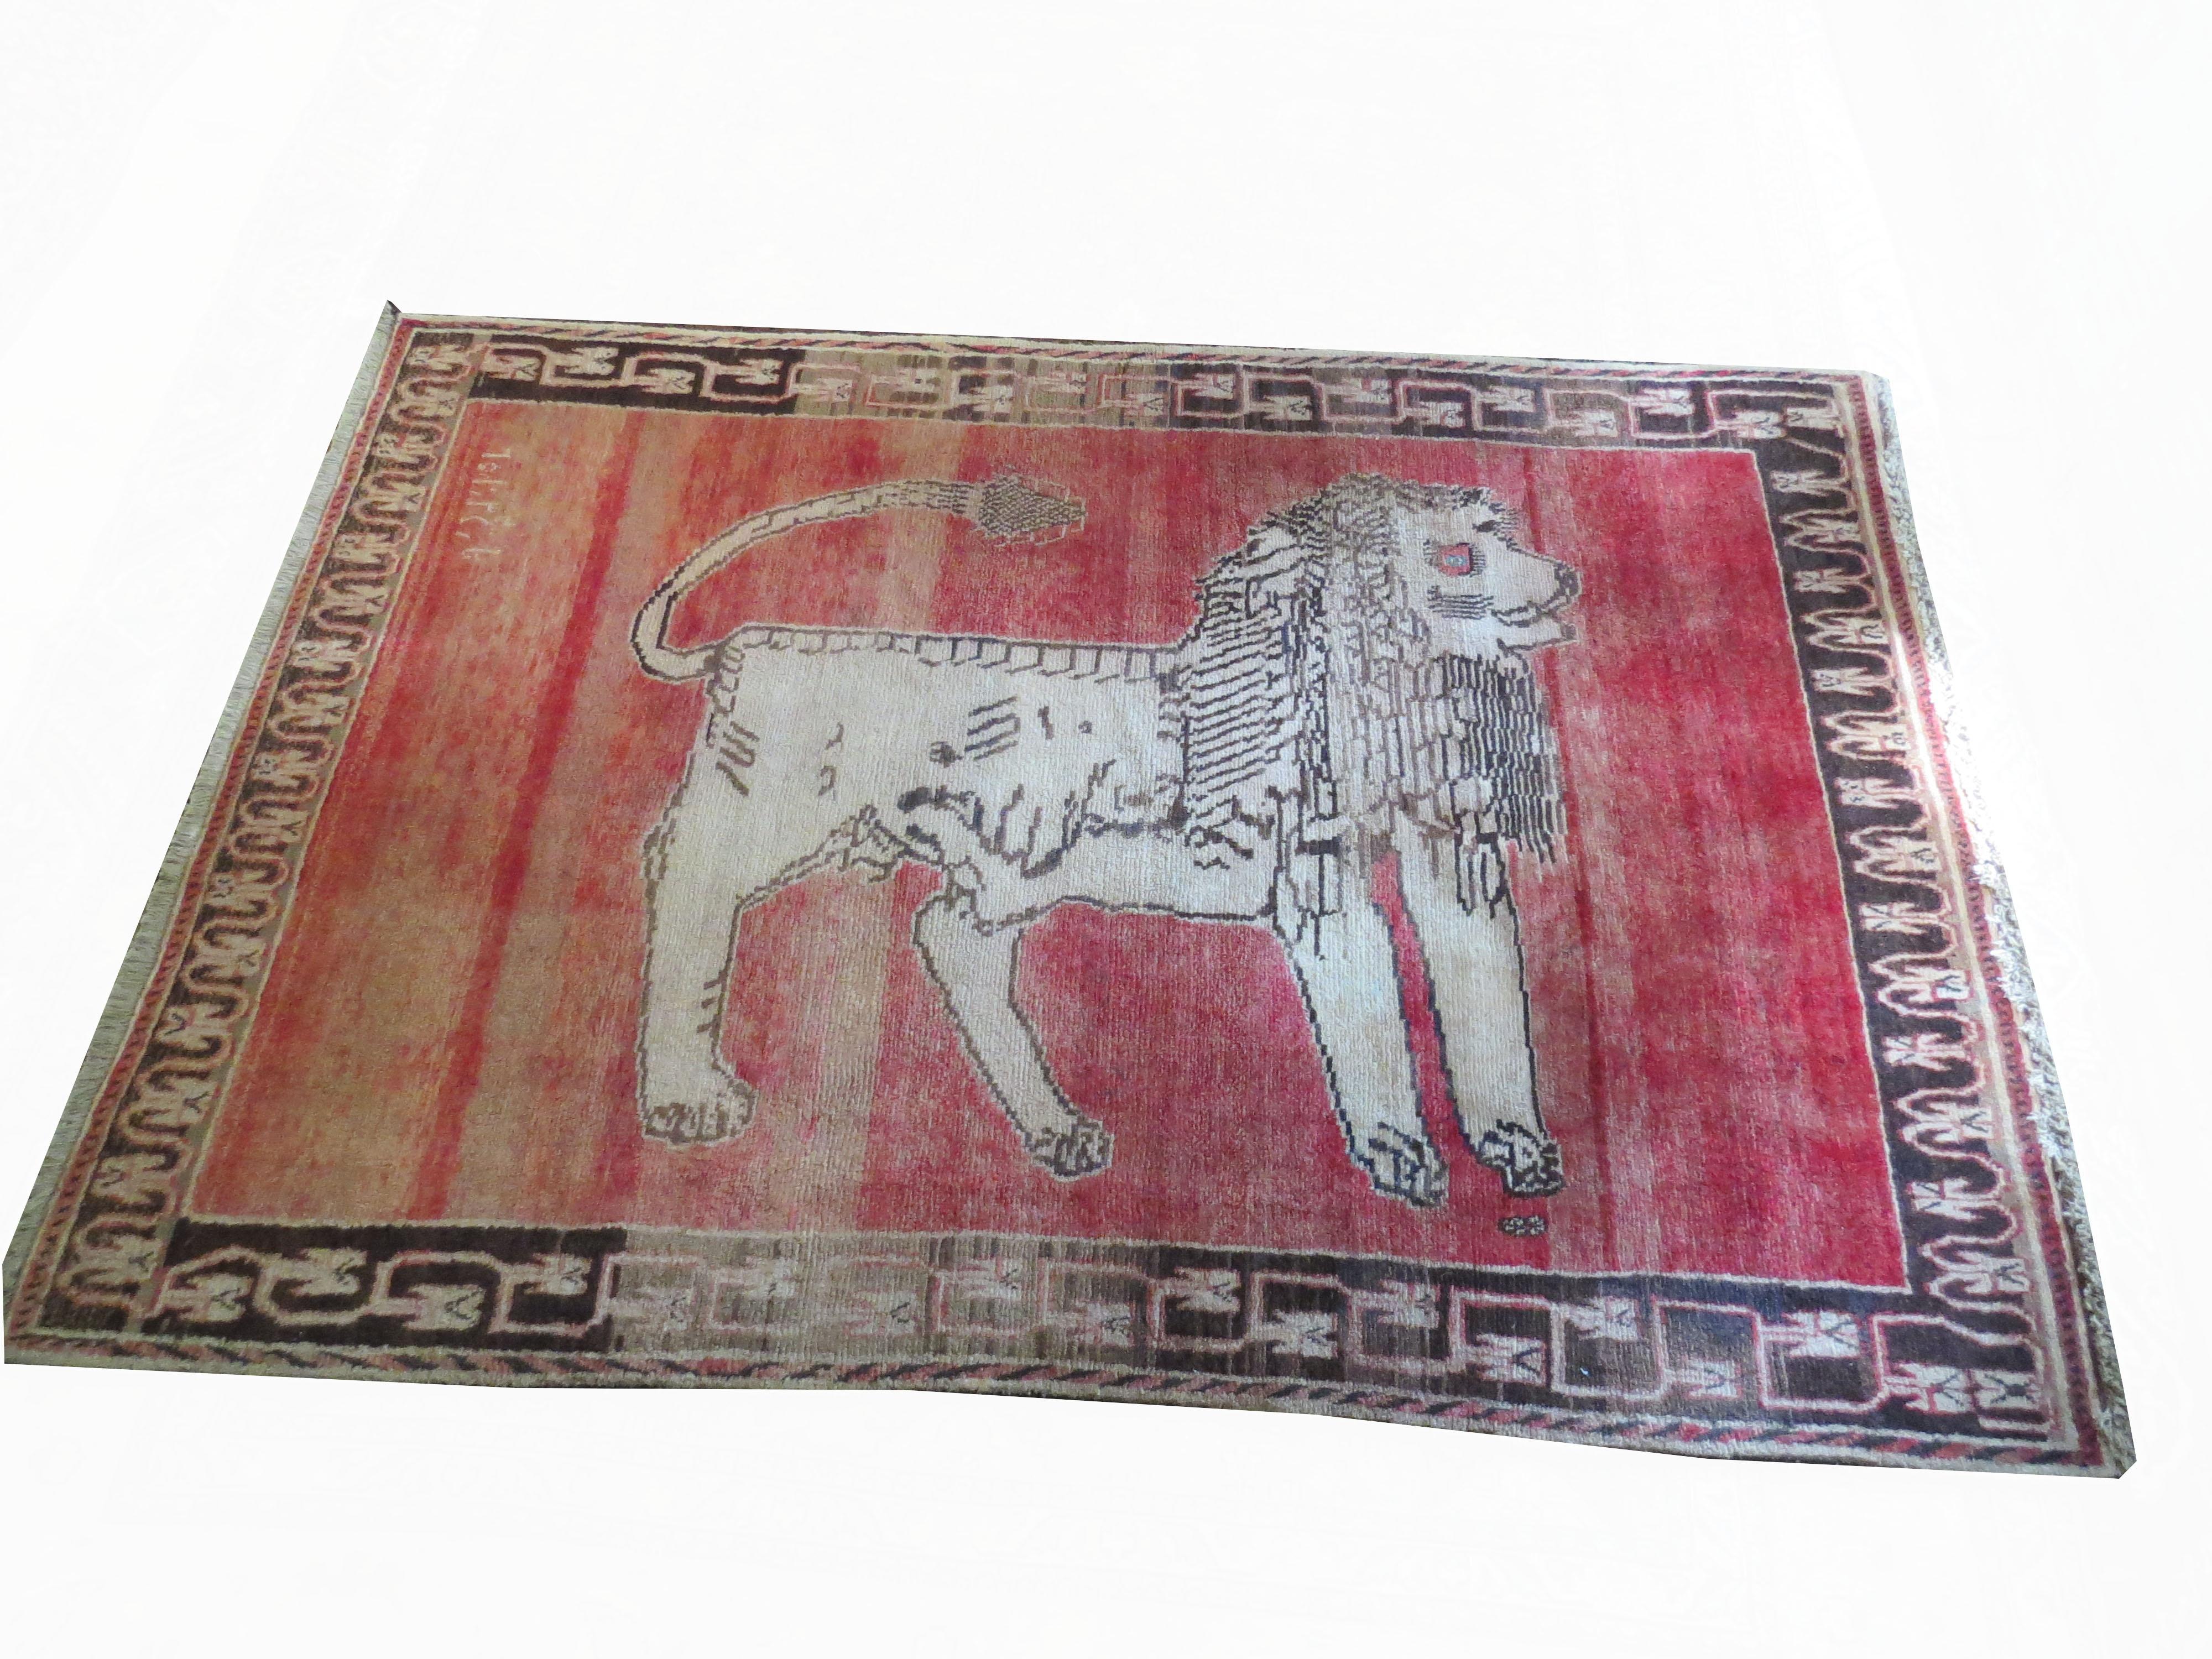 Antique Nomadic Lion tribal rugs are extremely rare. This signed Lion rug from East Turkestan has the special feature of years of abrash.
One unique characteristic of hand-spun yarn is that the yarn is of different diameters because it is not made